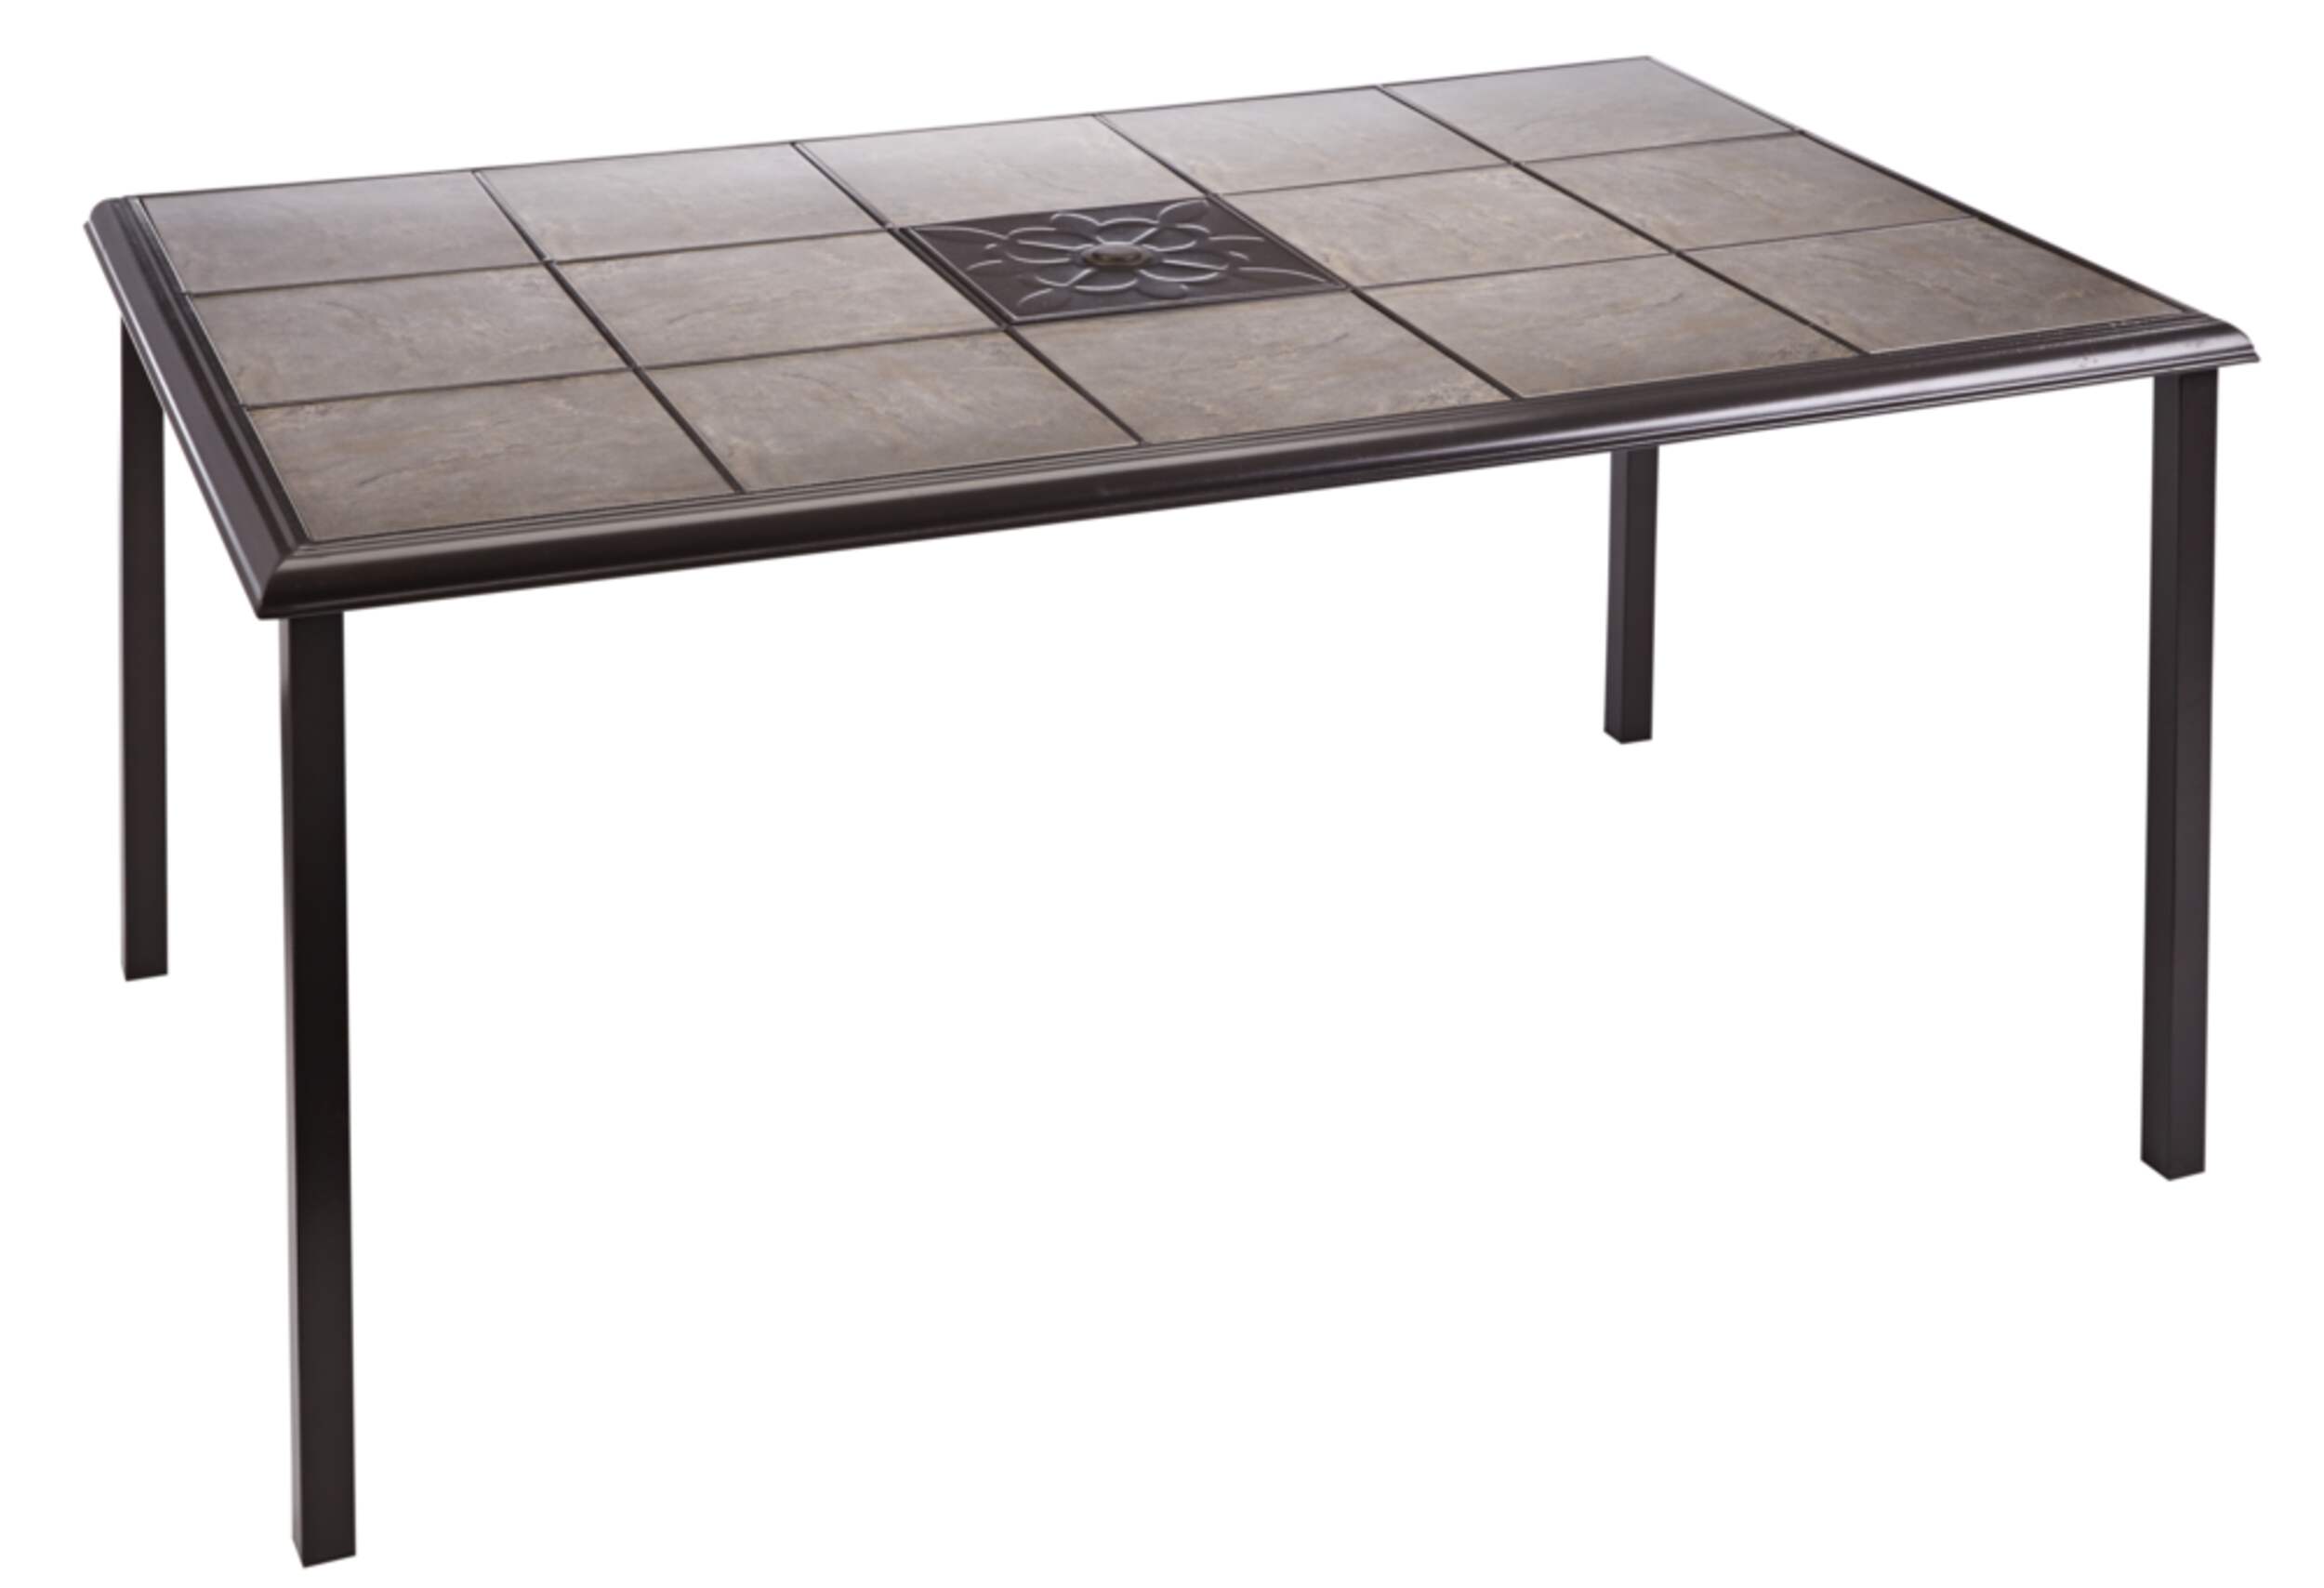 For Living Bluebay Rectangular Steel Outdoor Patio Dining Table w ...